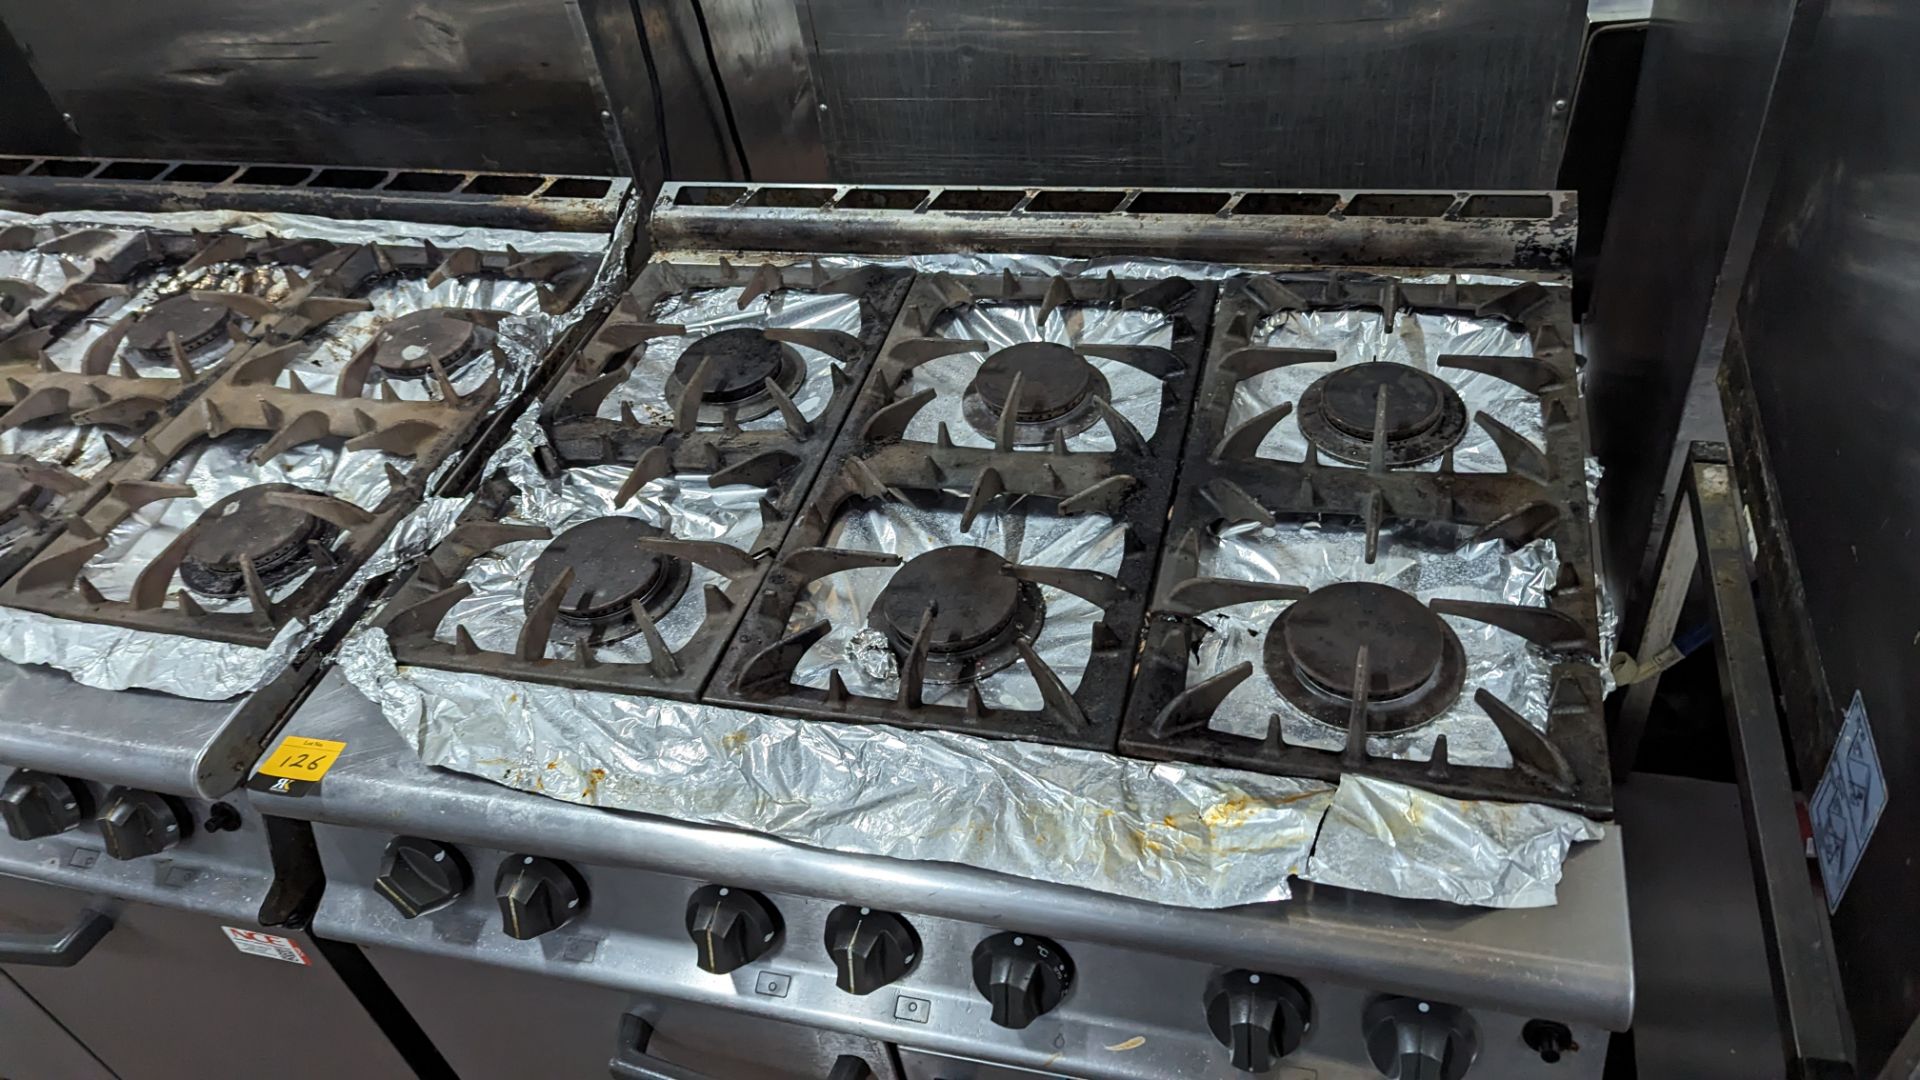 Falcon mobile stainless steel large 6 ring gas oven - Image 3 of 7